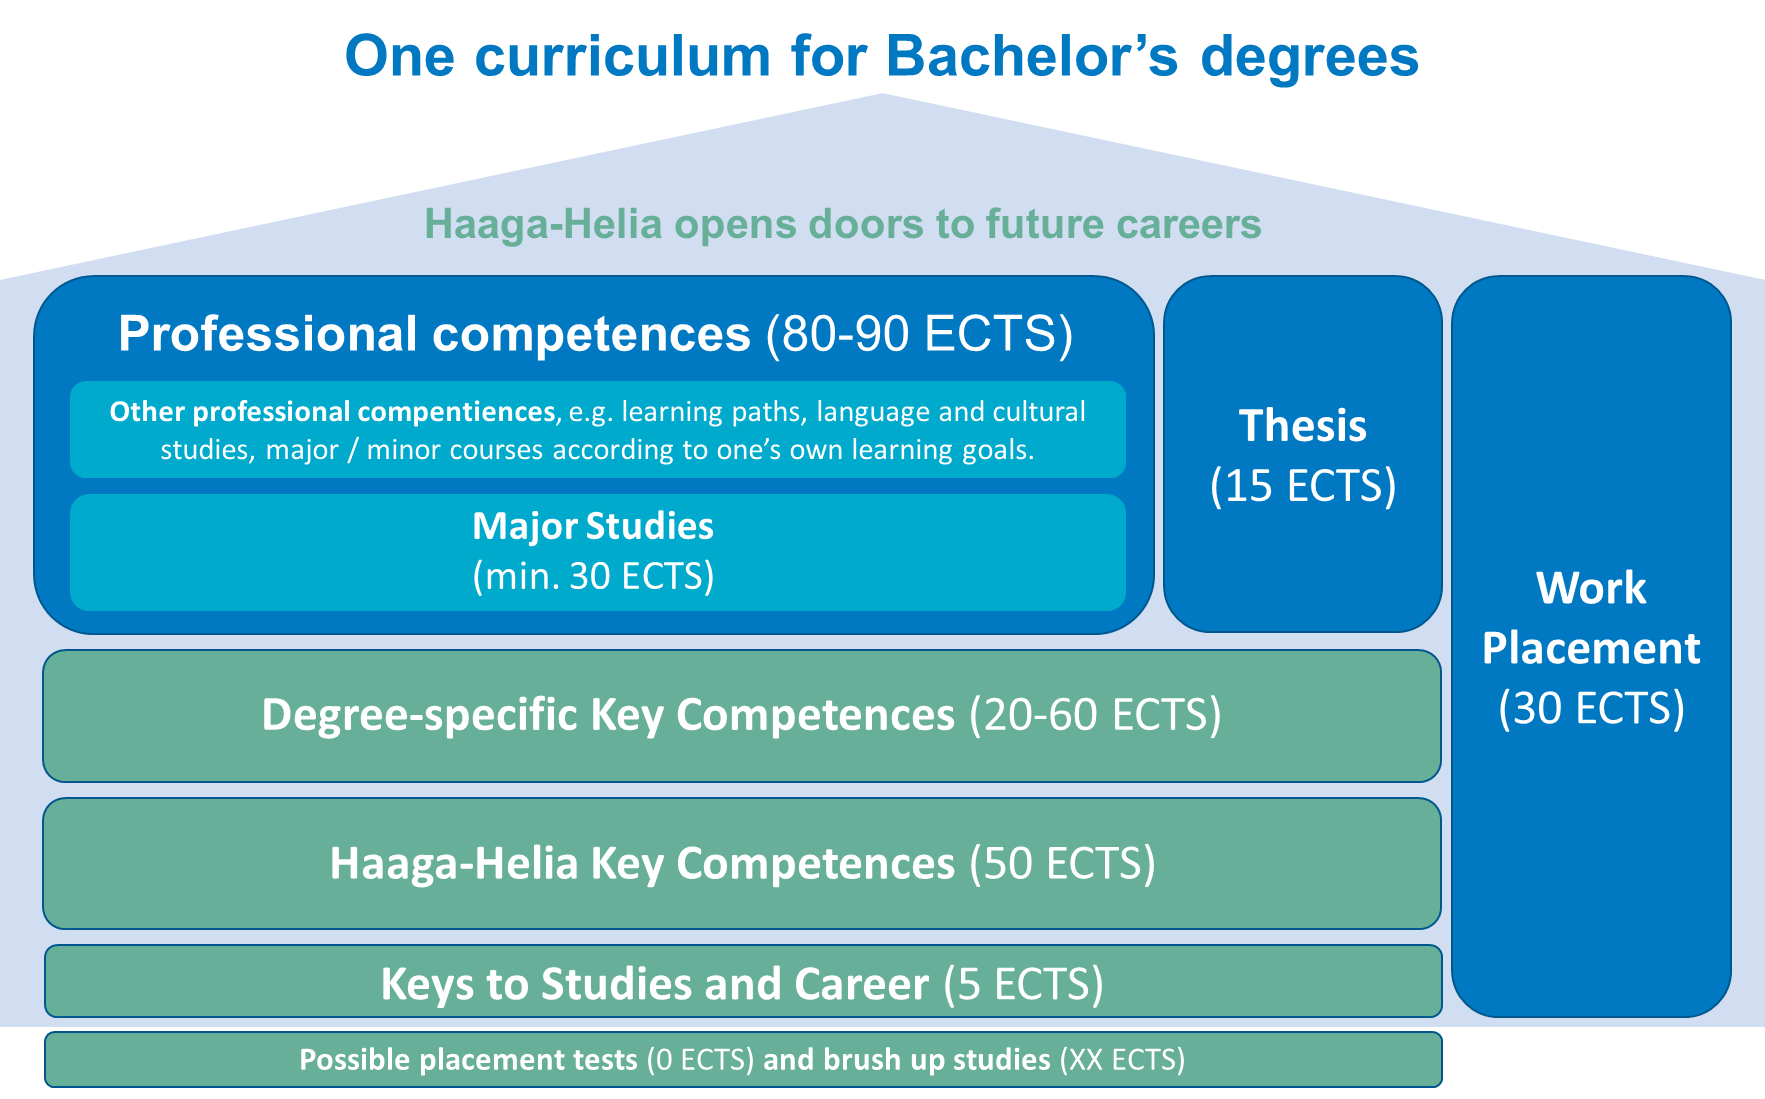 Picture 8. One curriculum for Bachelor’s degree